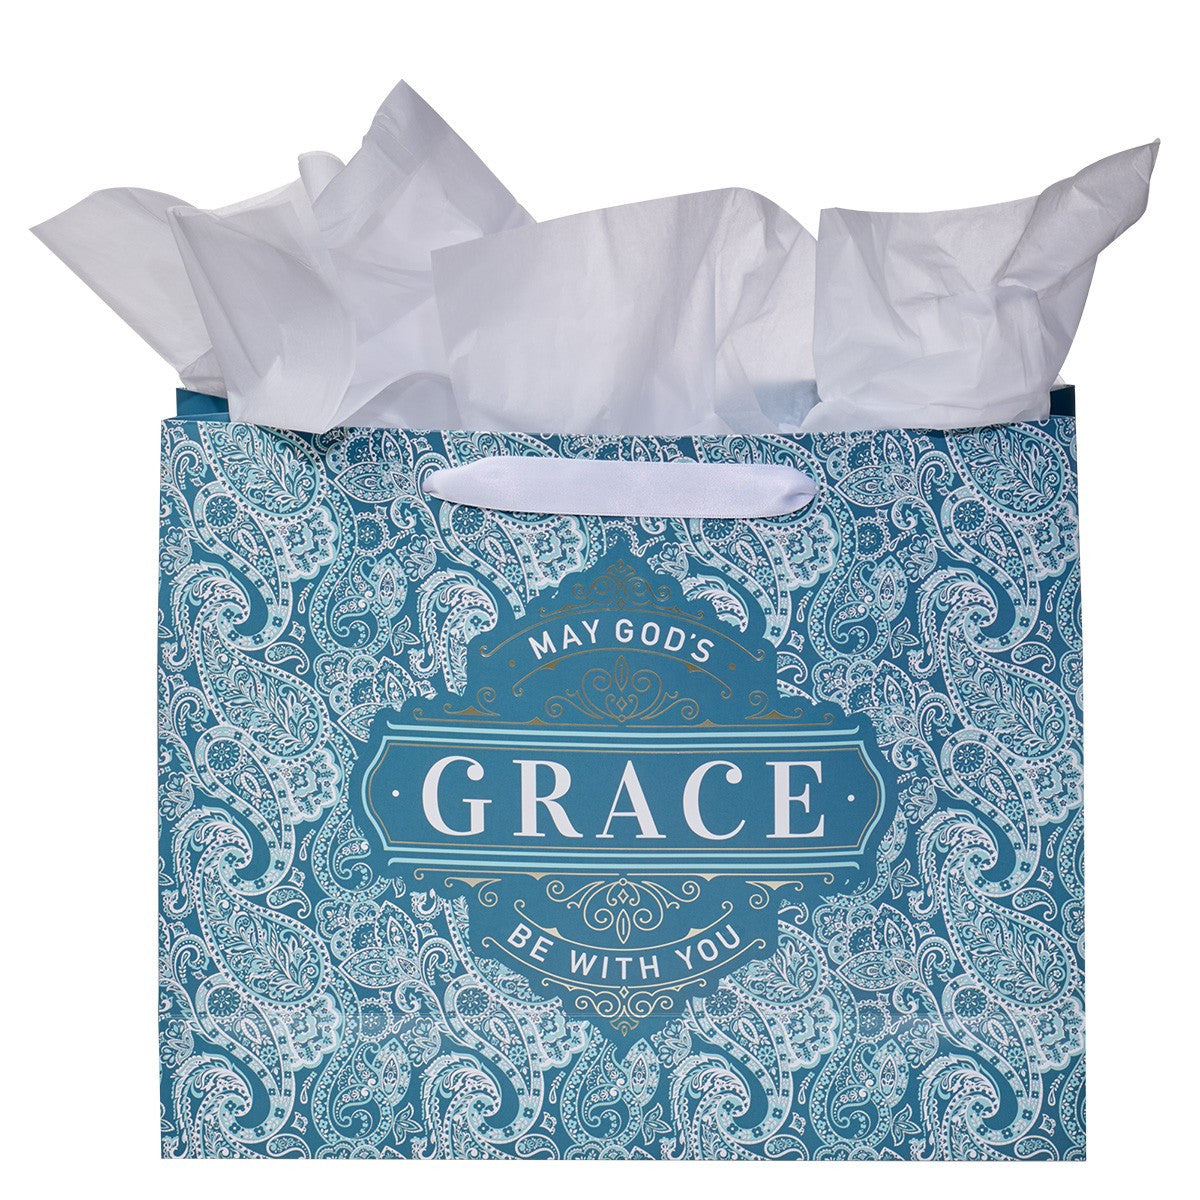 Teal Paisley God's Grace Large Landscape Gift Bag Set with Card - The Christian Gift Company